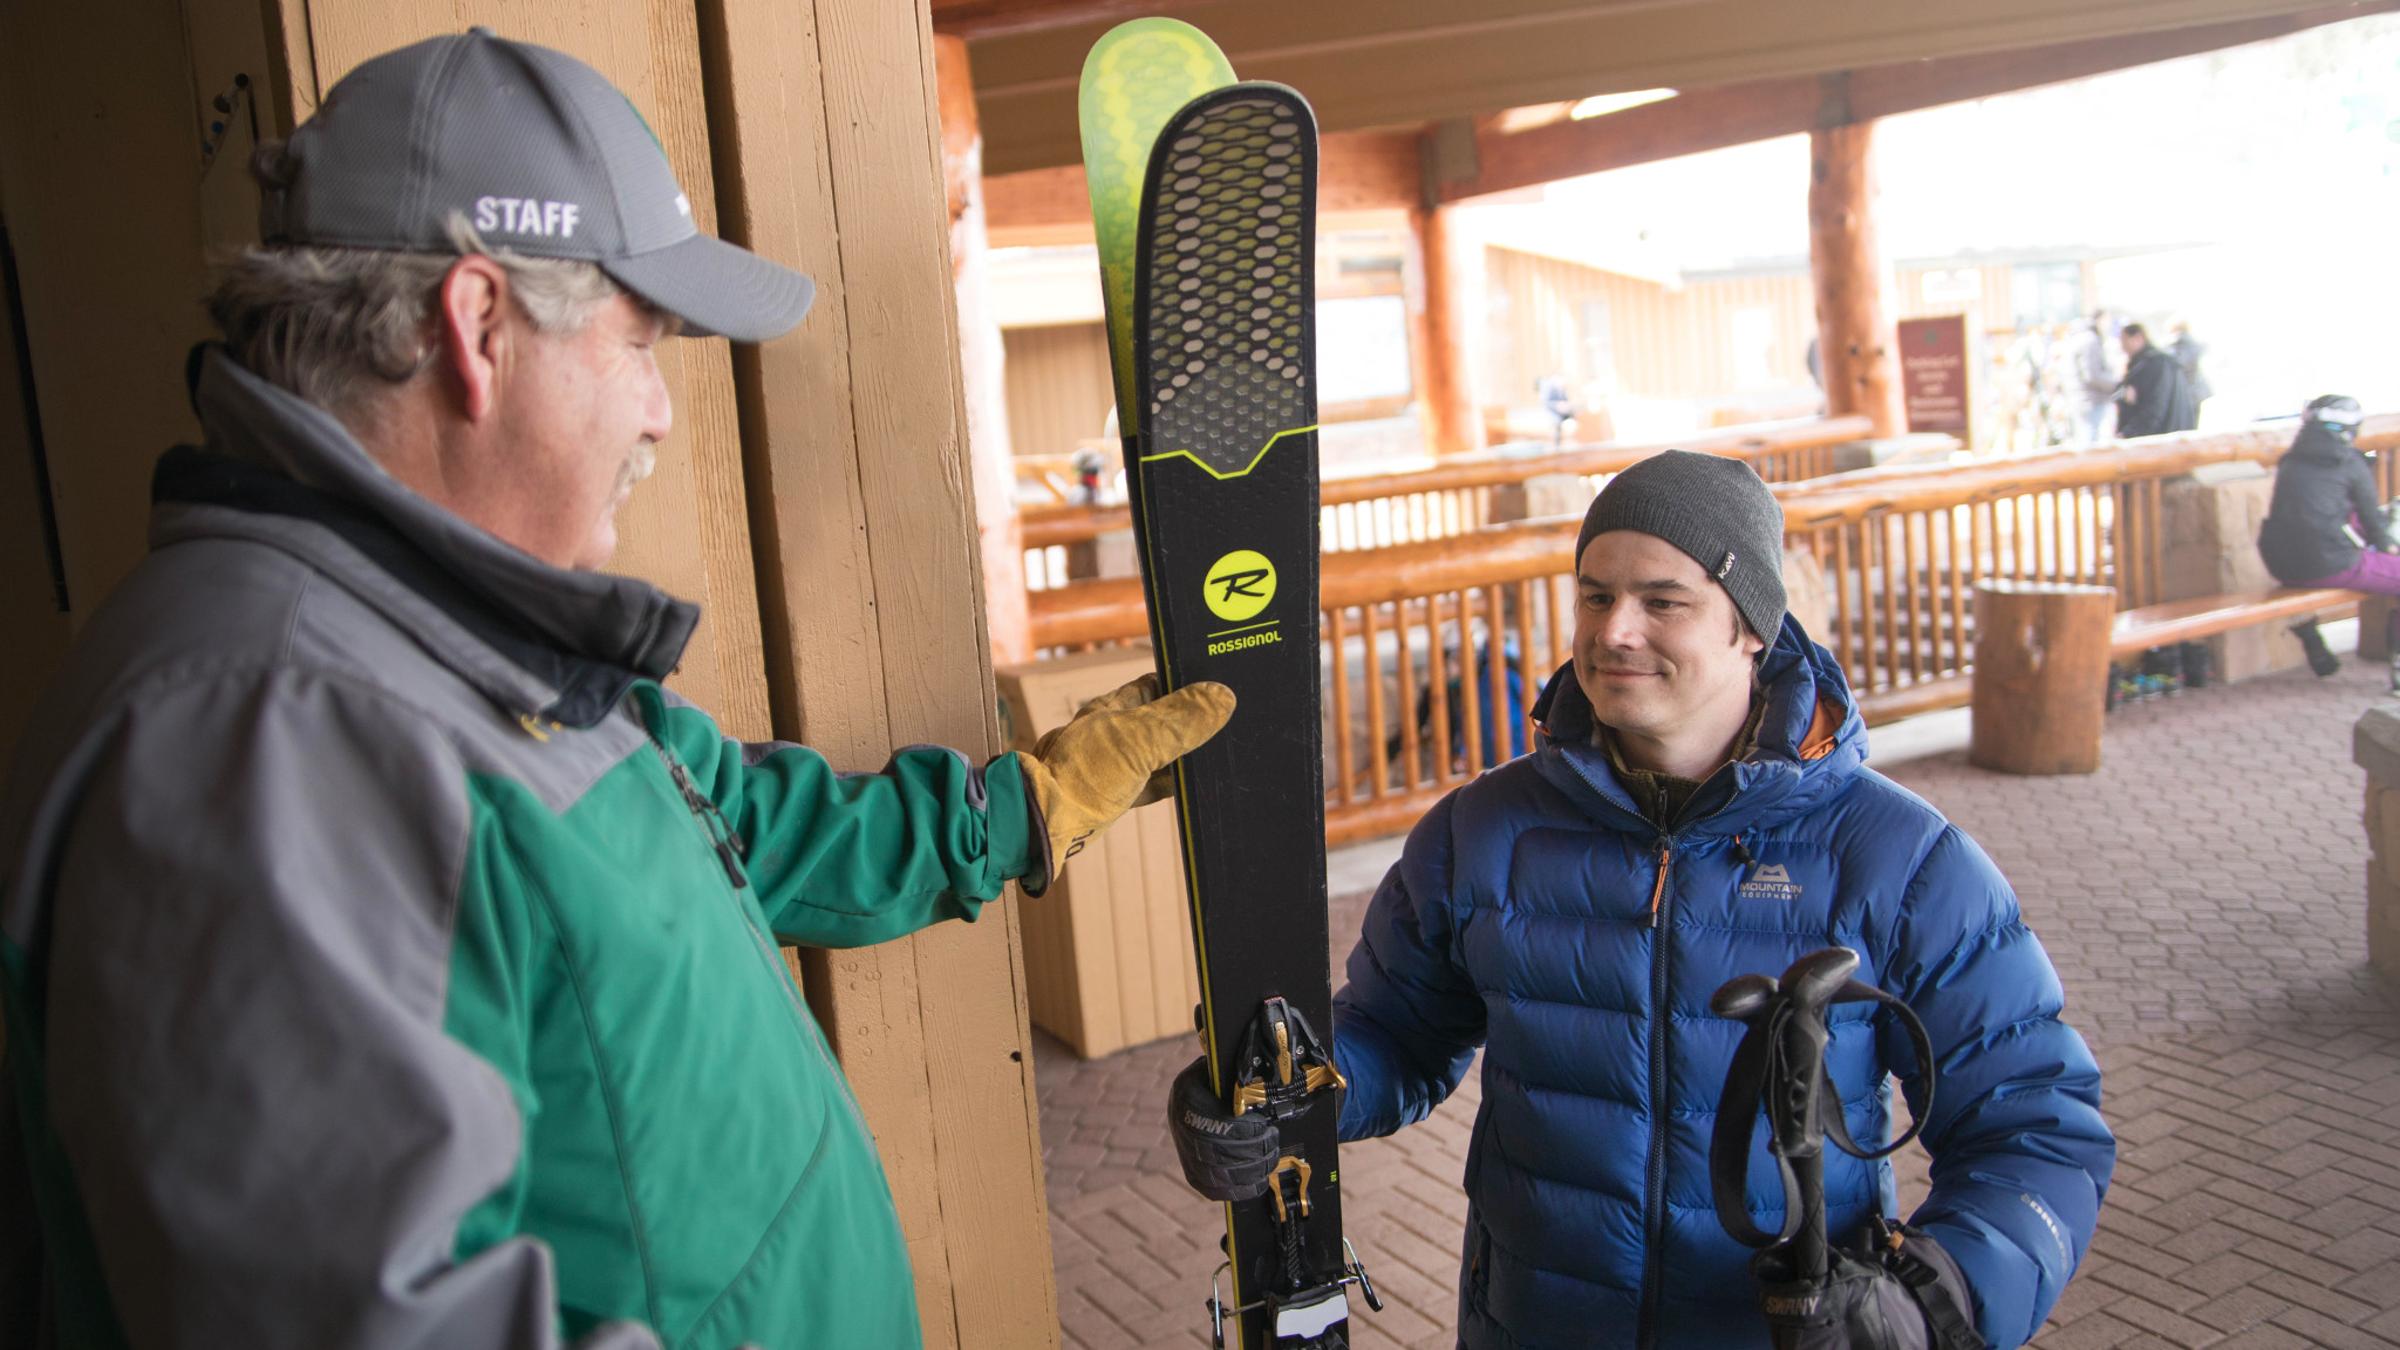 A guest receiving their skis at the ski corral